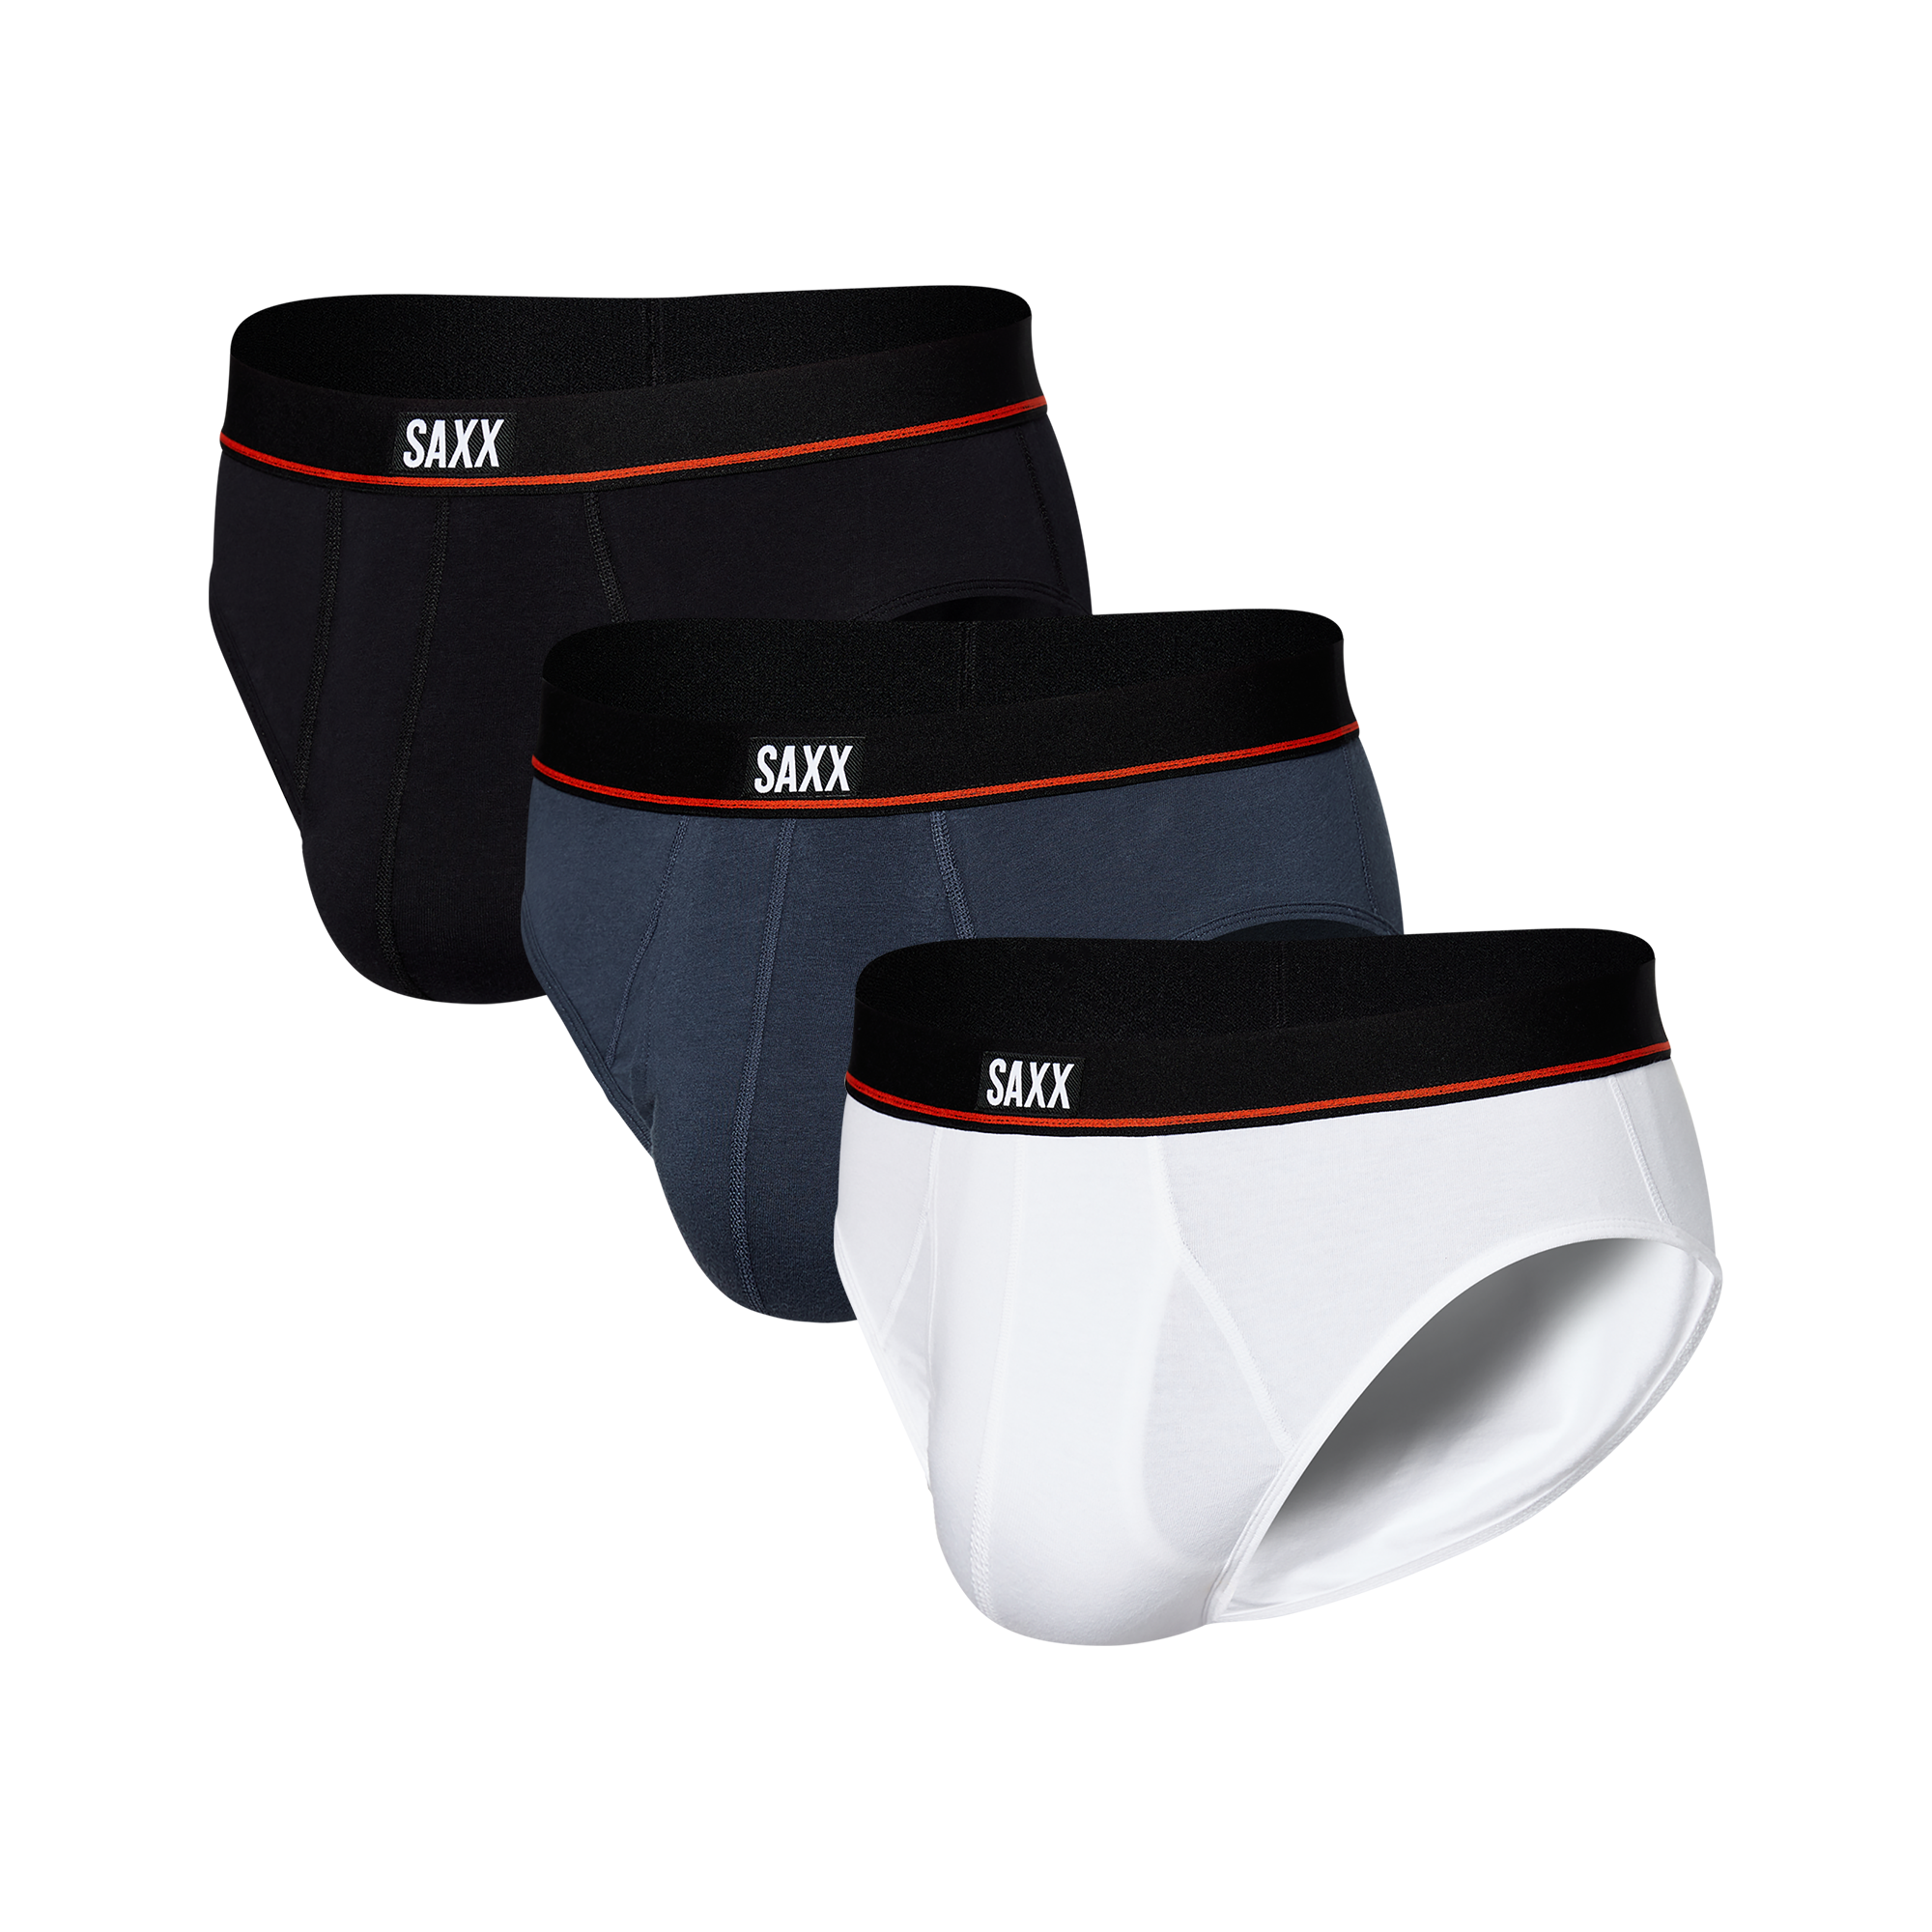 SAXX Underwear Co. Men's Underwear - Non-Stop Stretch Cotton Boxer Brief  Pack of 5 with Built-In Pouch Support and Fly Soft, Breathable and Moisture  Wicking, Black/Deep Navy/White, Small at  Men's Clothing